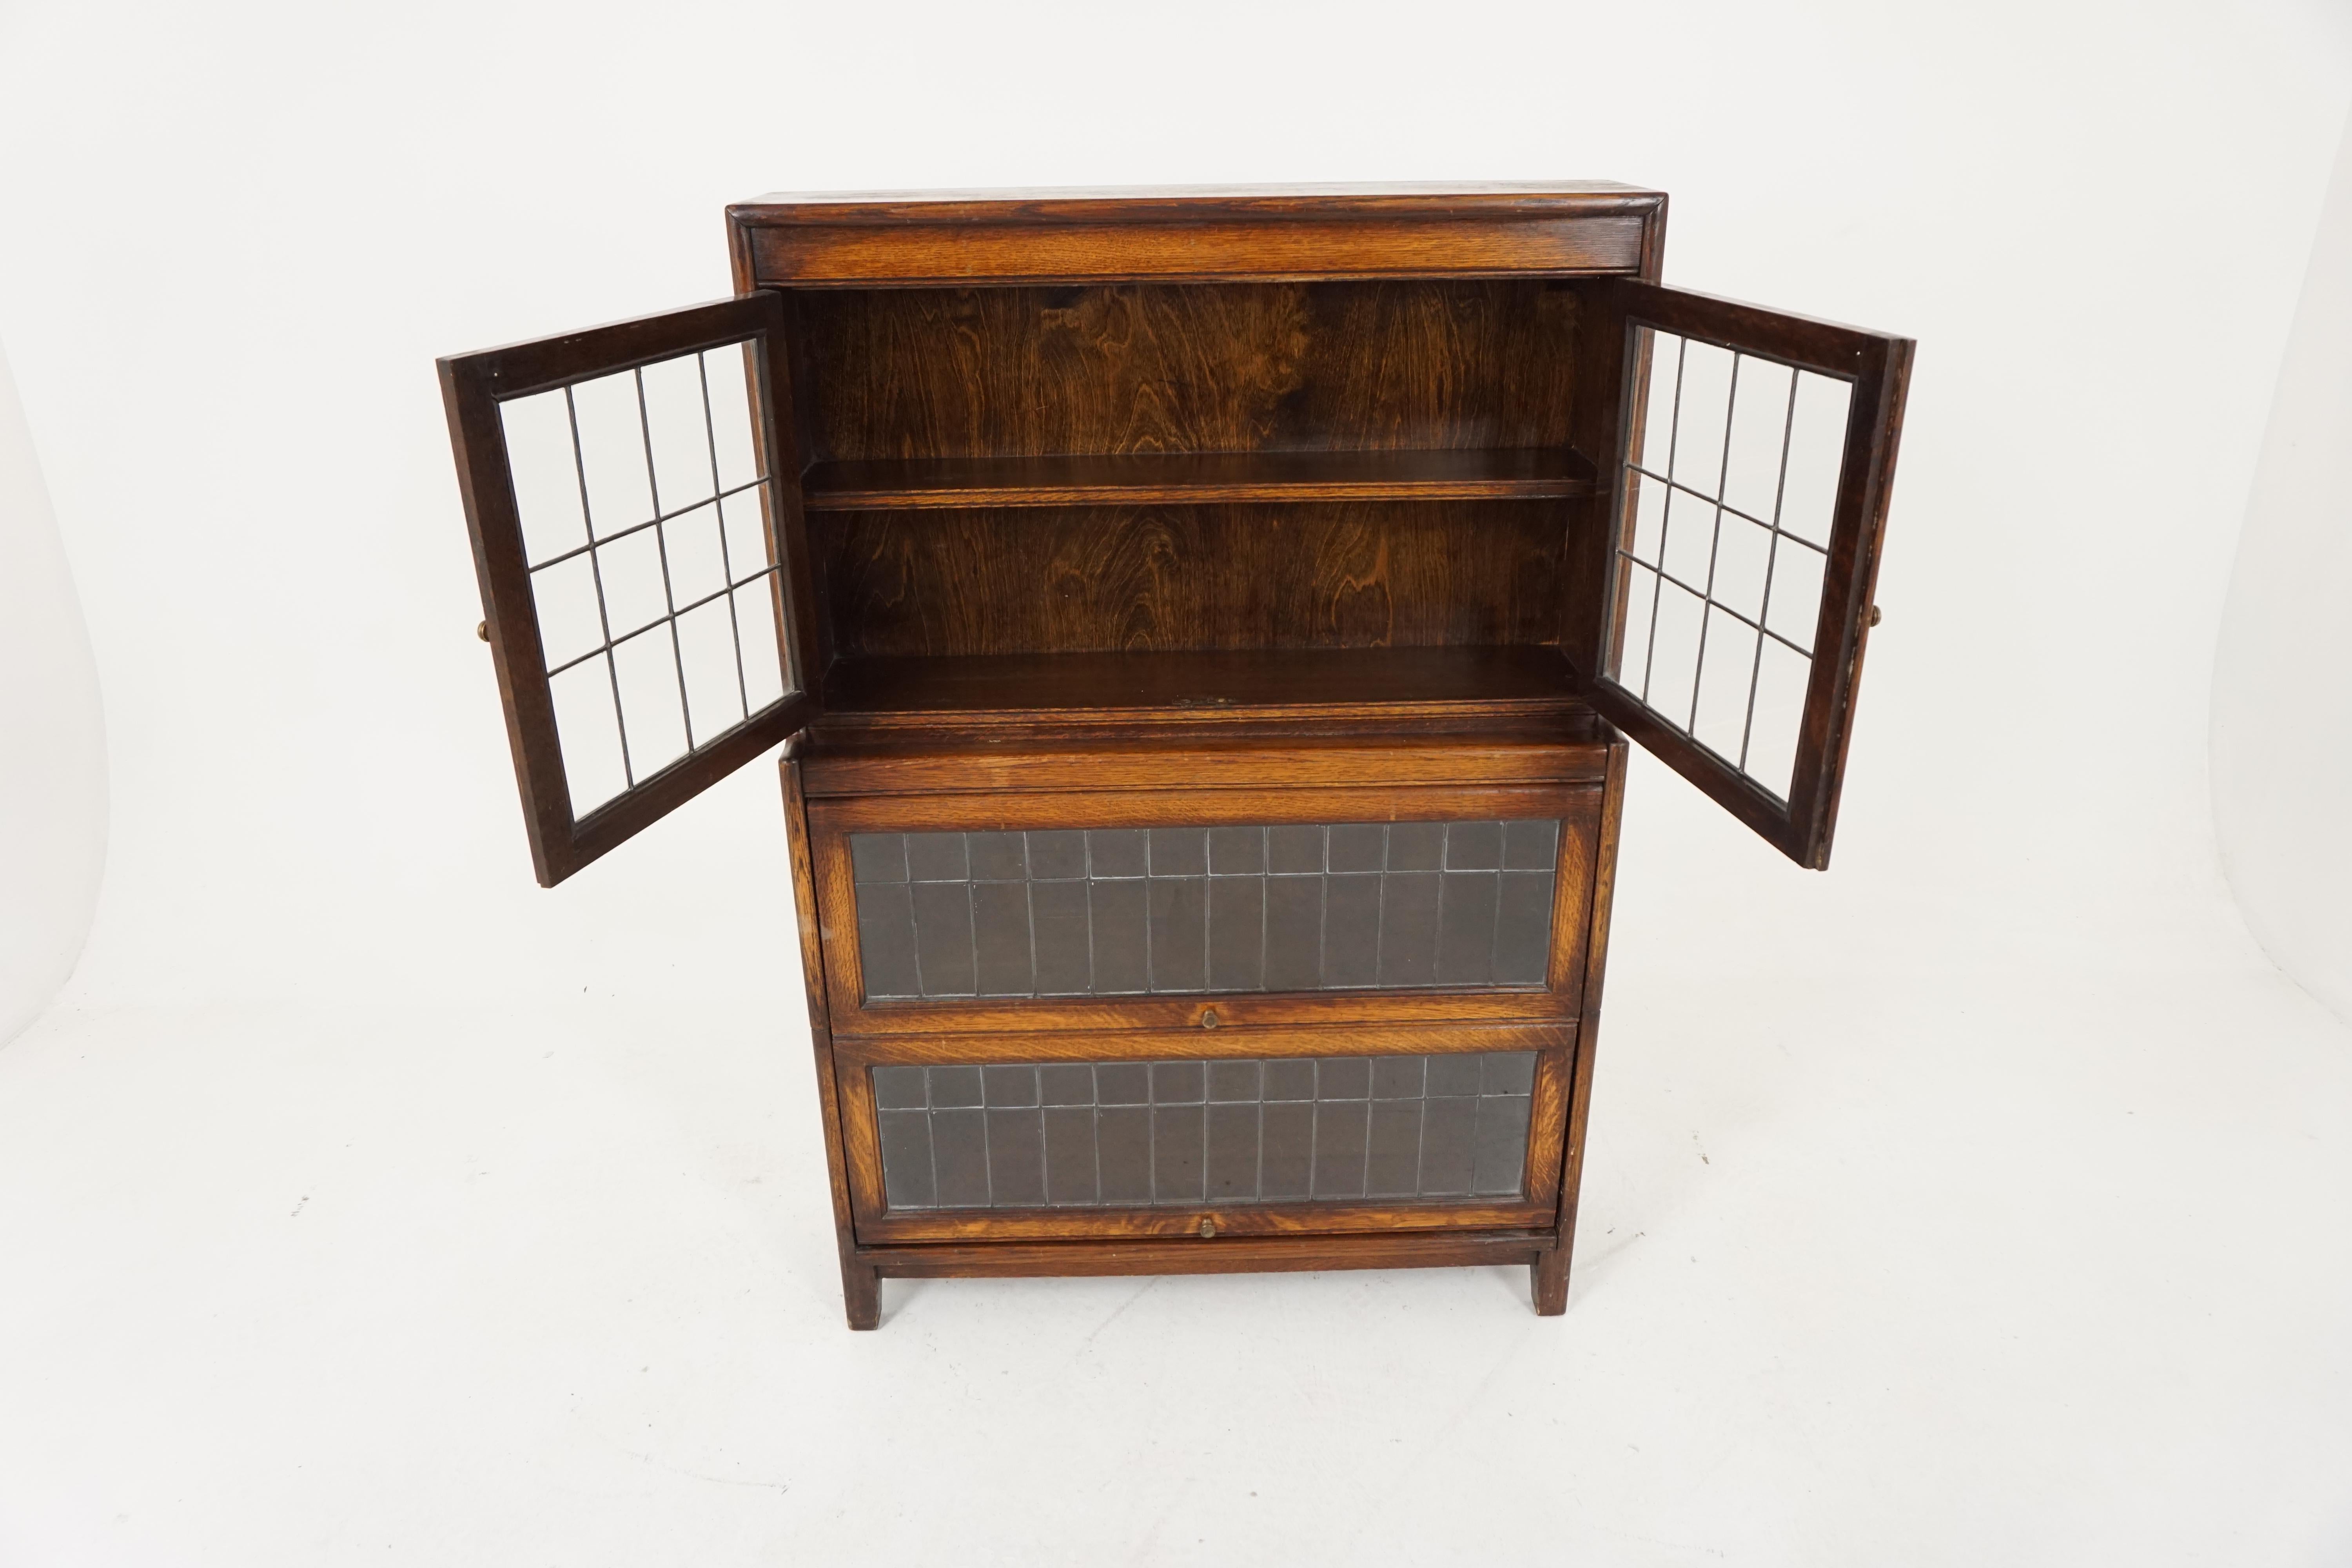 Antique oak bookcase, leaded glass stacking barrister bookcase or sectional bookcase, antique furniture, Scotland, 1920, B1866

Scotland, 1920
Solid oak construction
Original finish
Three graduating sections with the lowest being deeper than